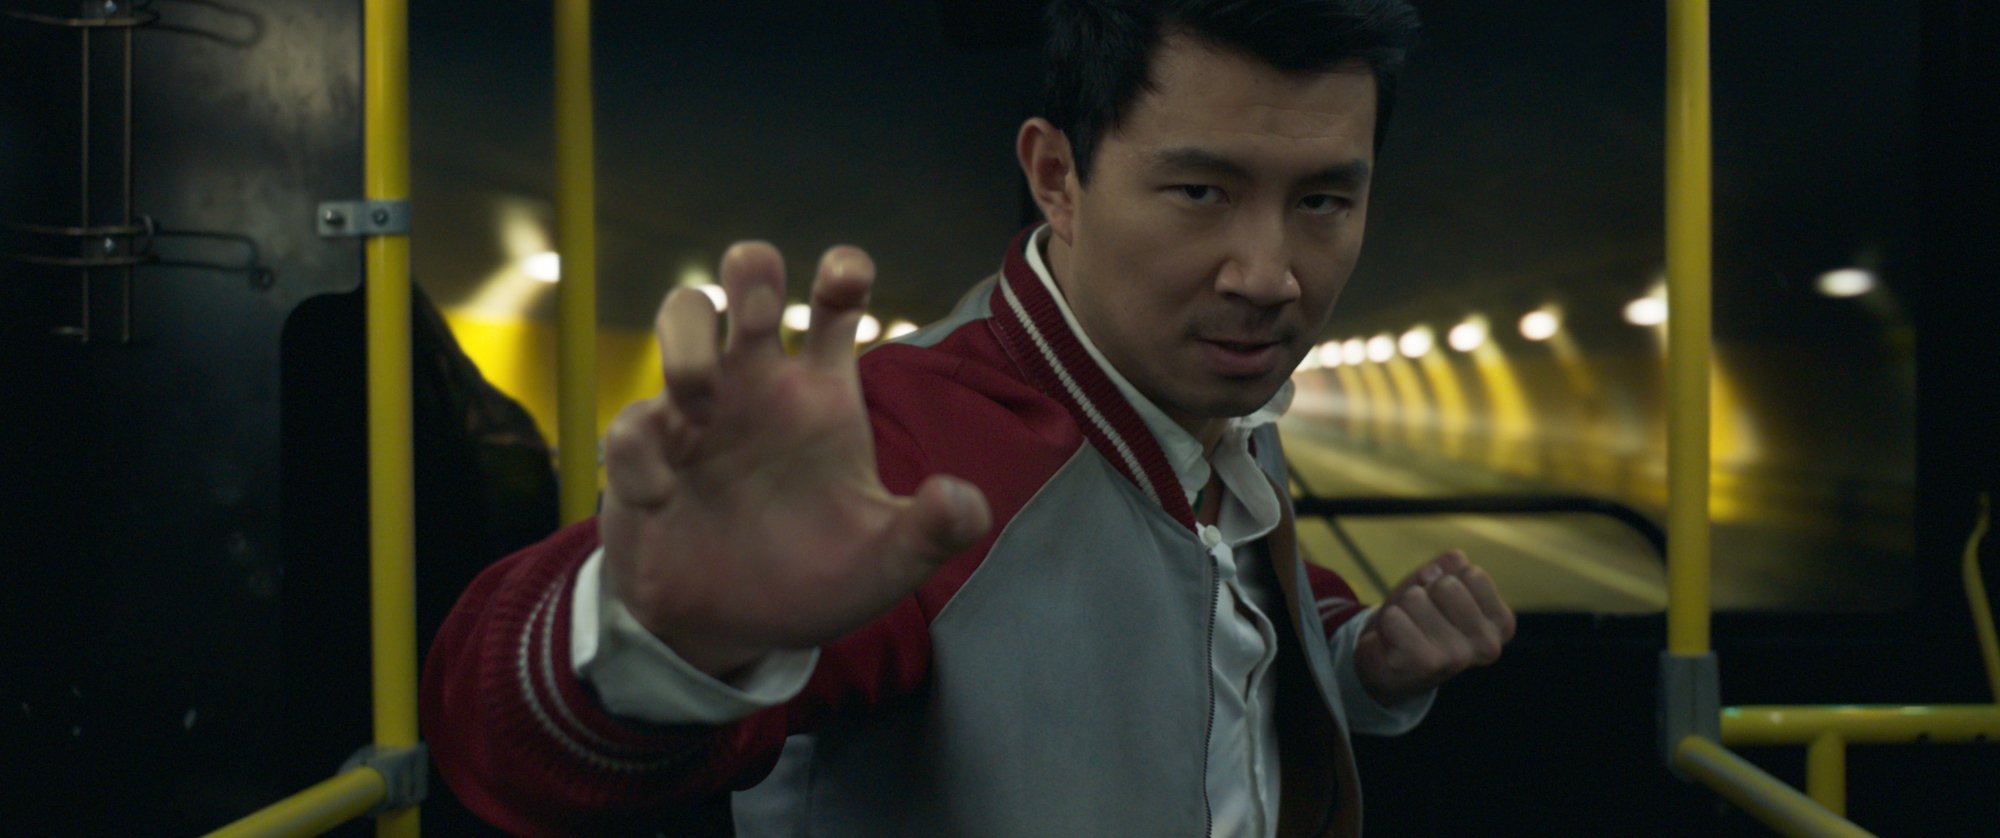 Simu Liu fighting in bus scene in 'Shang-Chi and the Legend of the Ten Rings'